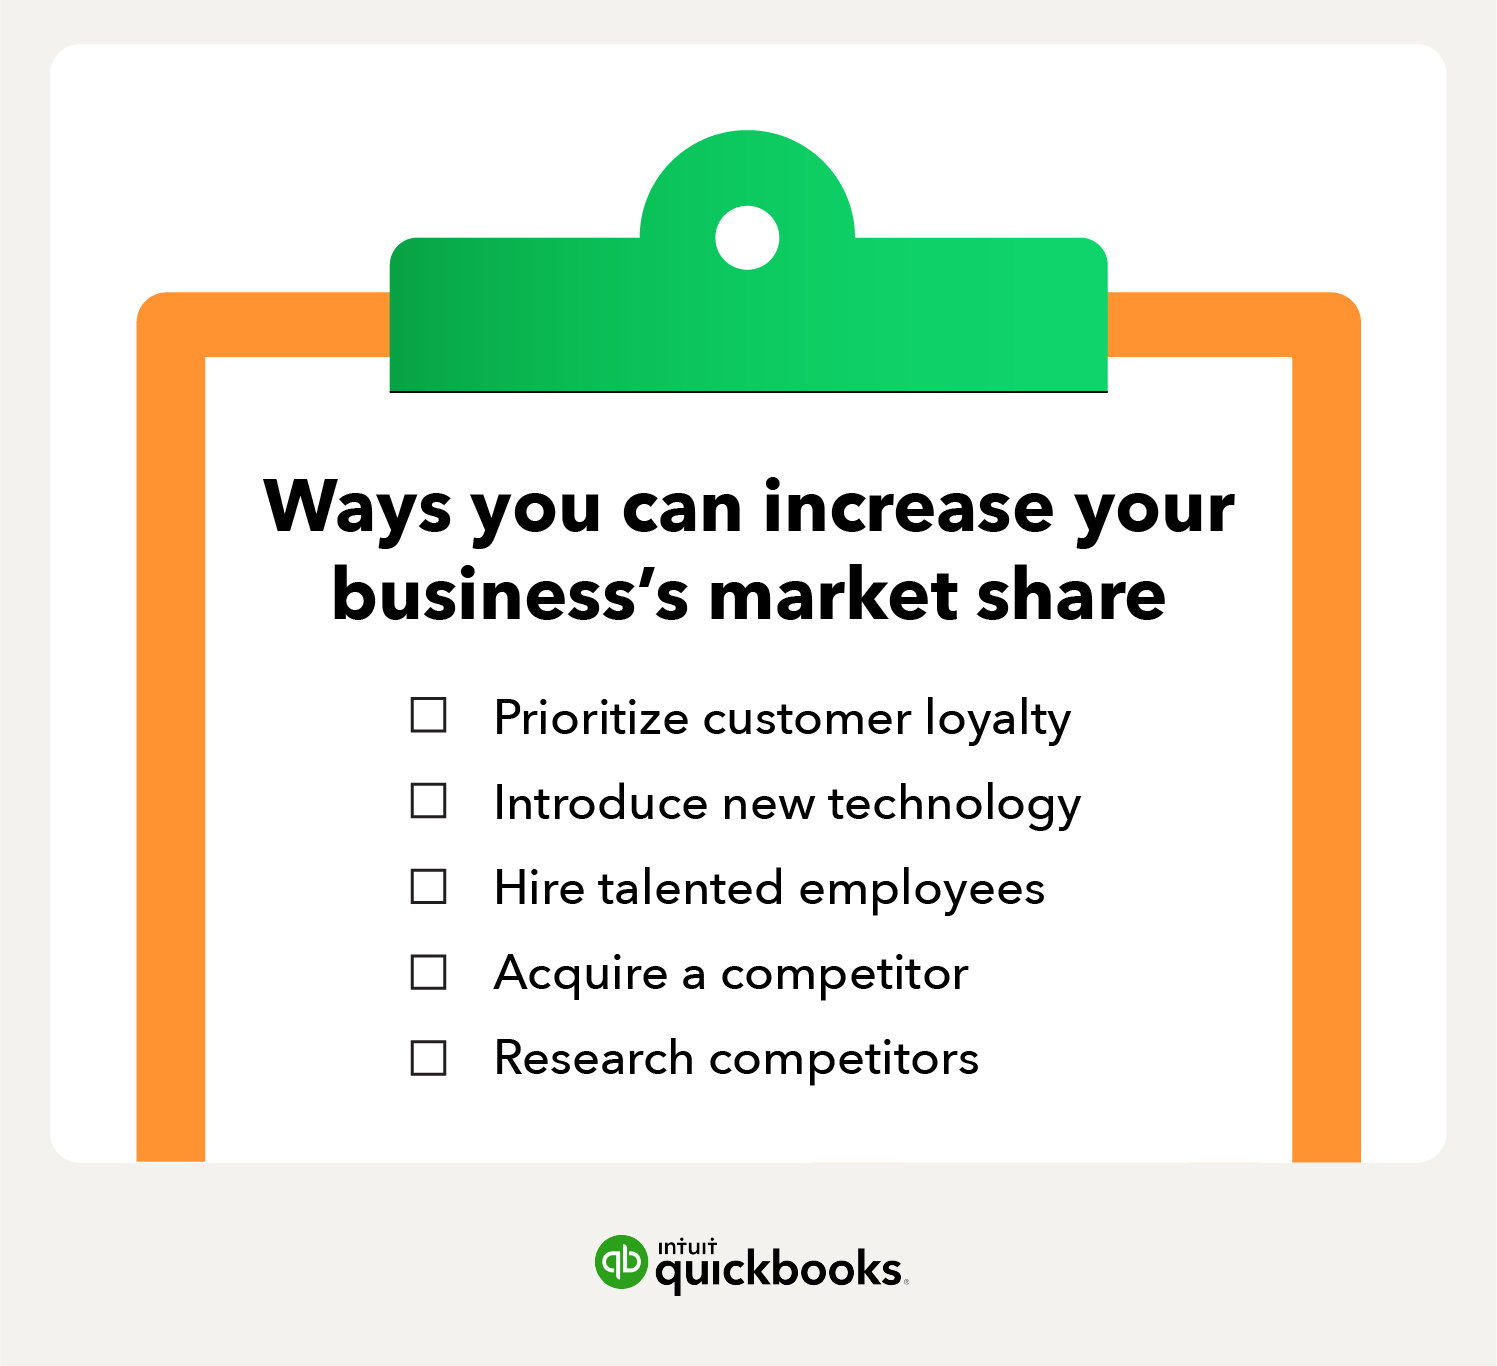 Clipboard illustrating ways to increase market share